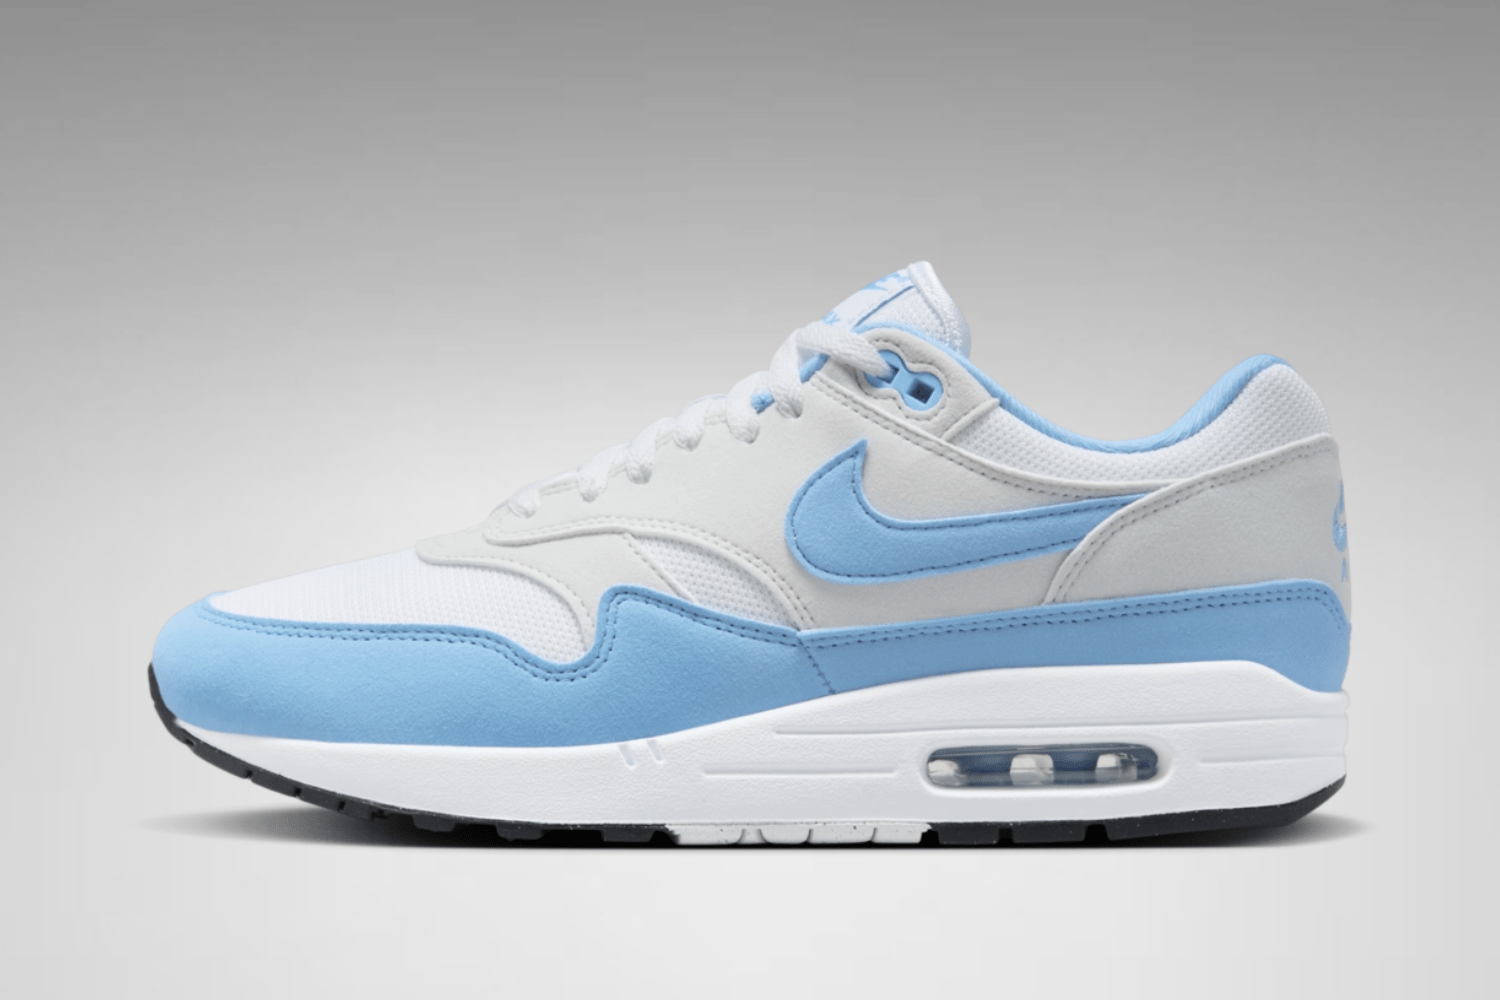 The Nike Air Max 1 gets 'University Blue' makeover